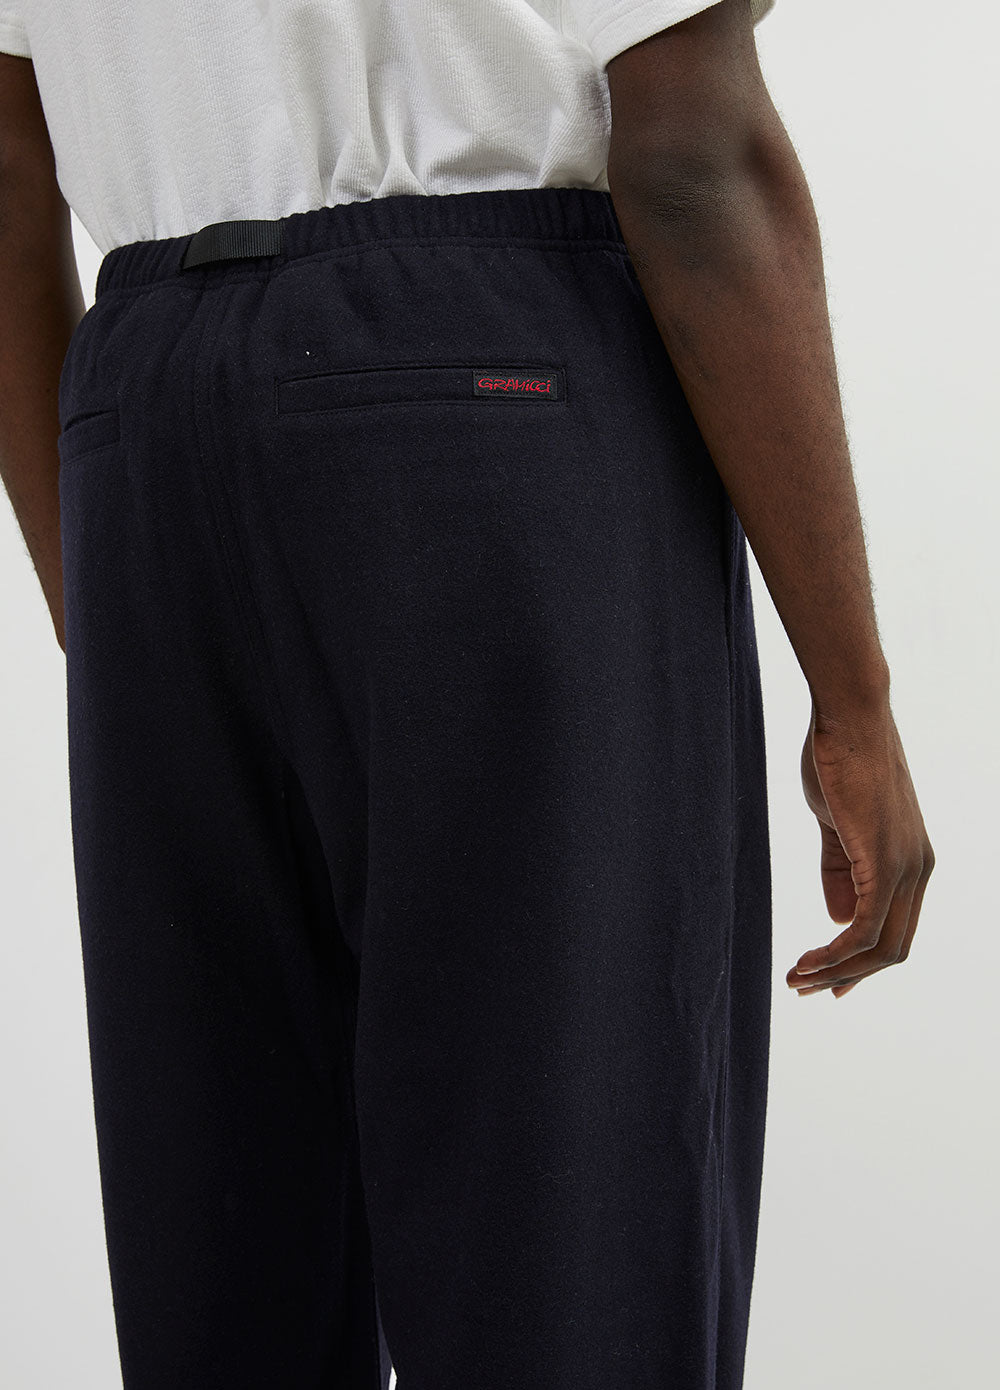 Tuck Tapered Pants